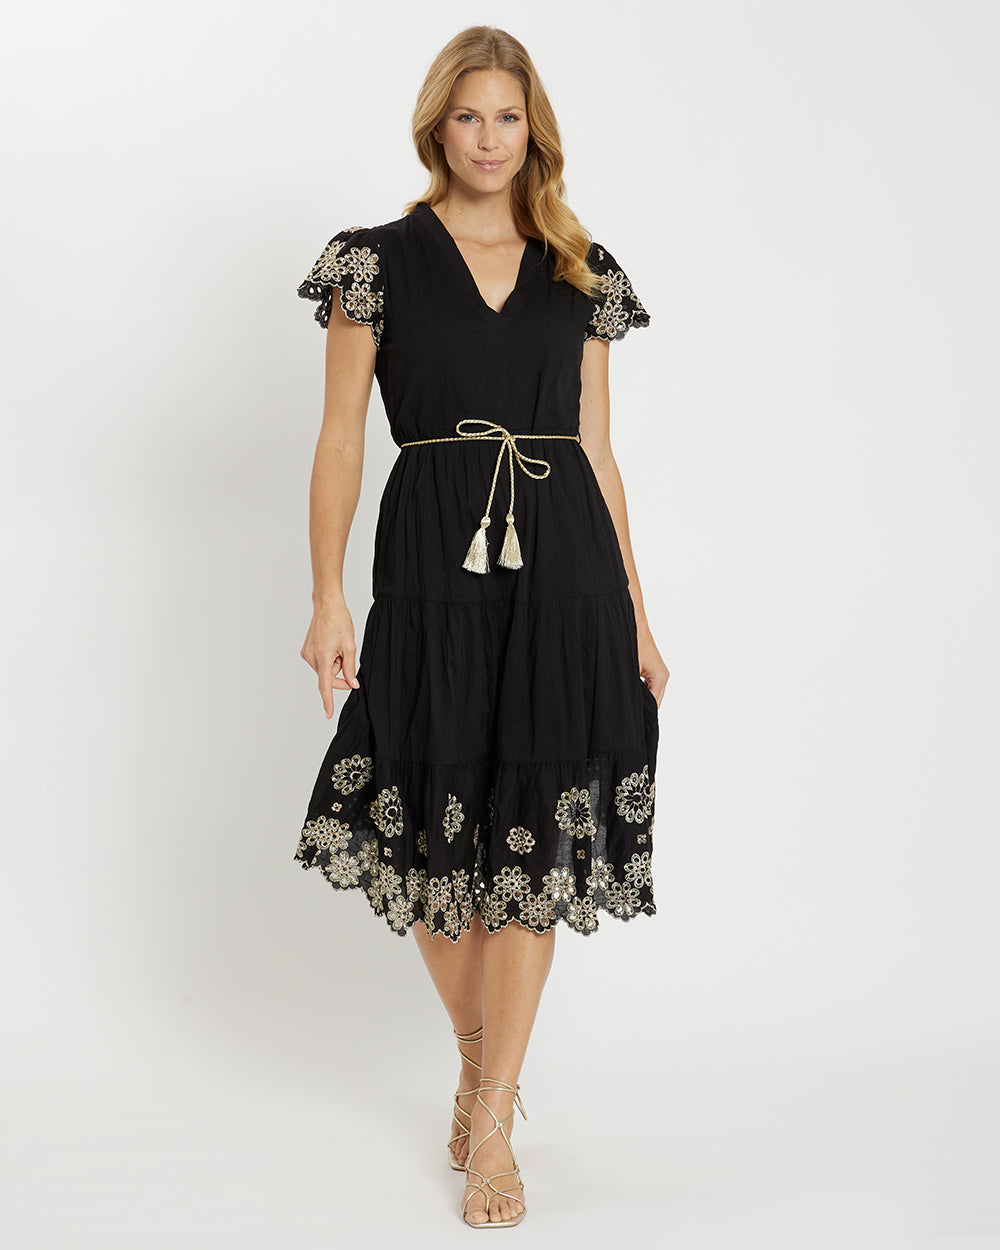 Libby Dress - Embroidered Cotton